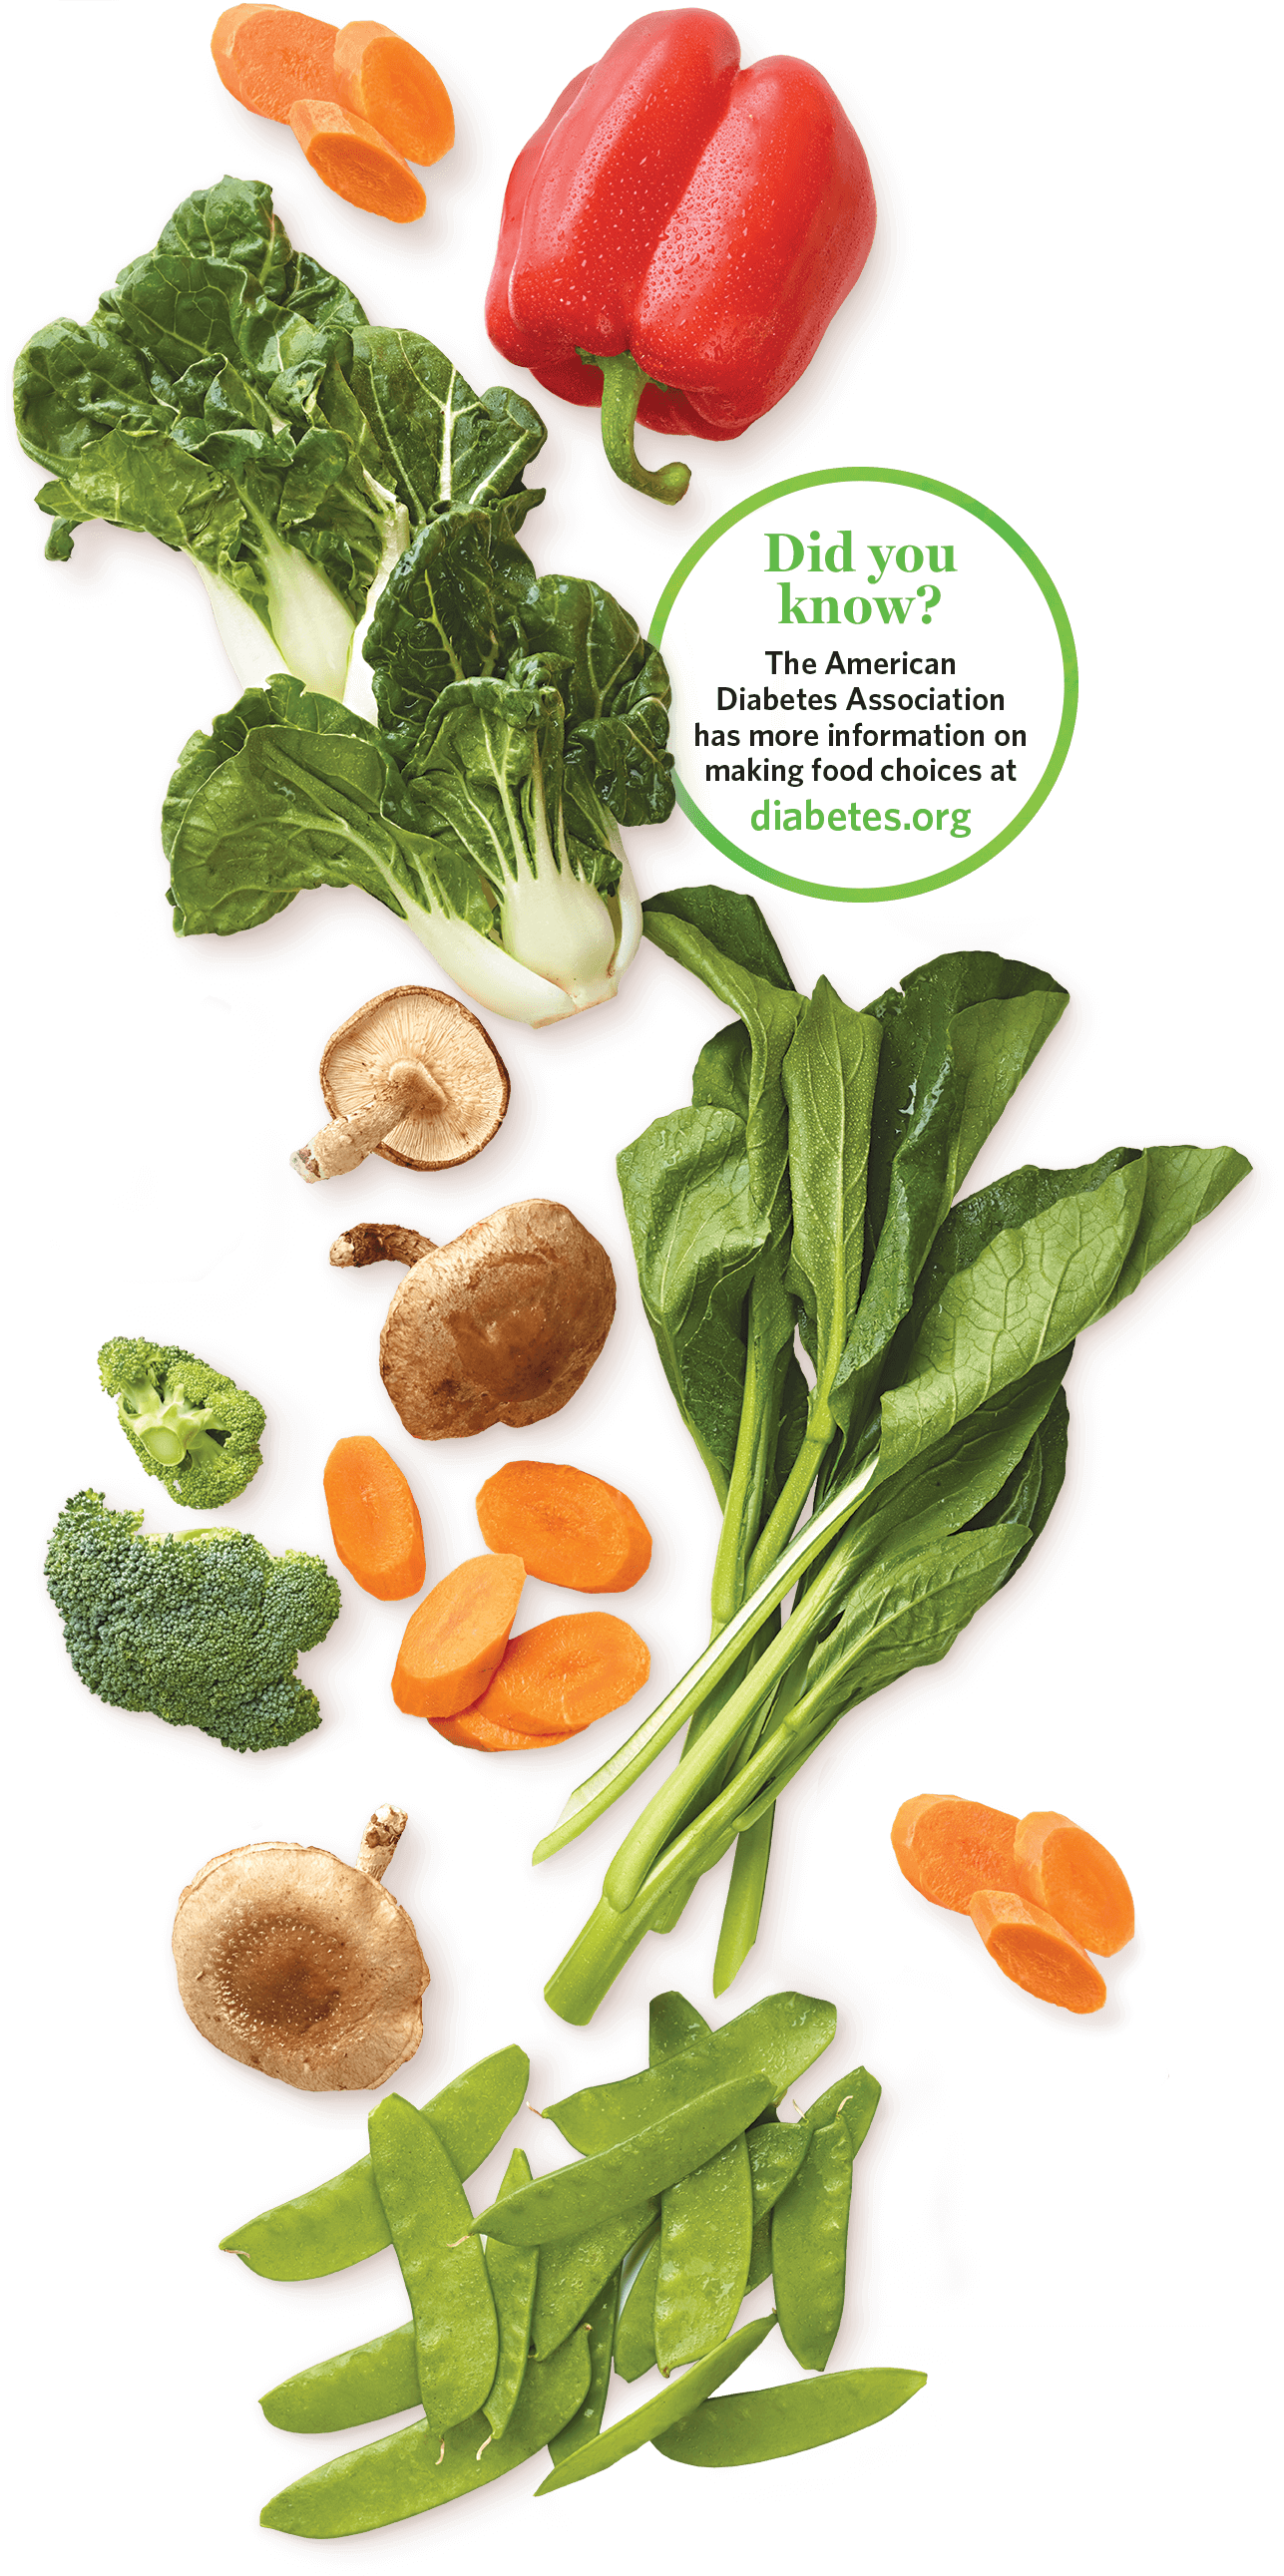 Top-down view of a variety of vegetables